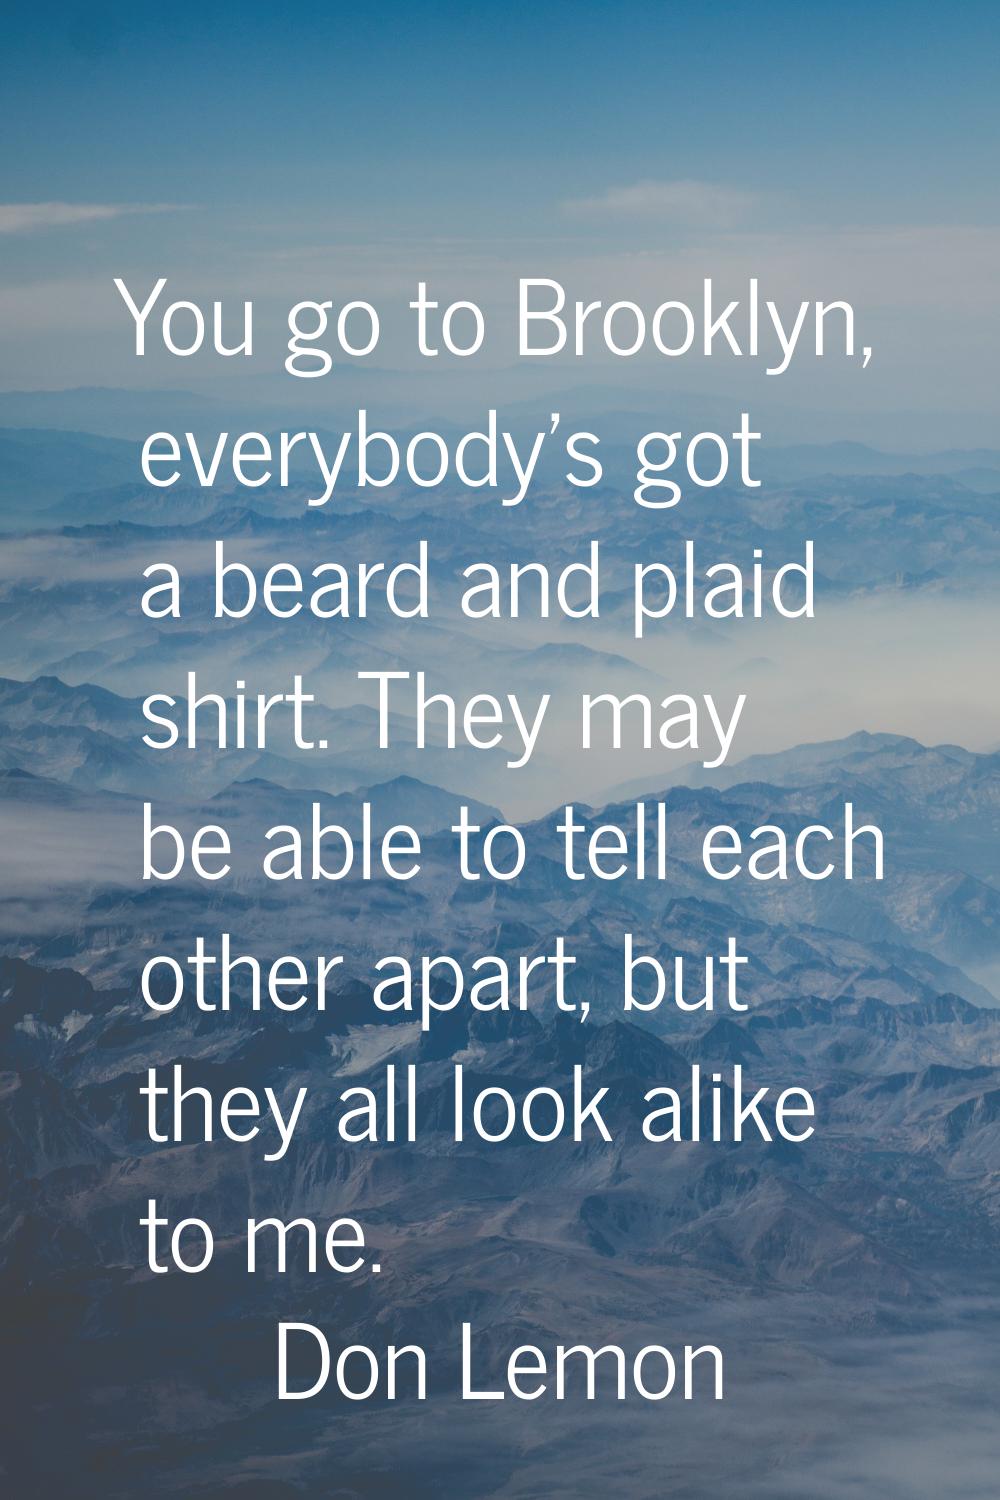 You go to Brooklyn, everybody's got a beard and plaid shirt. They may be able to tell each other ap